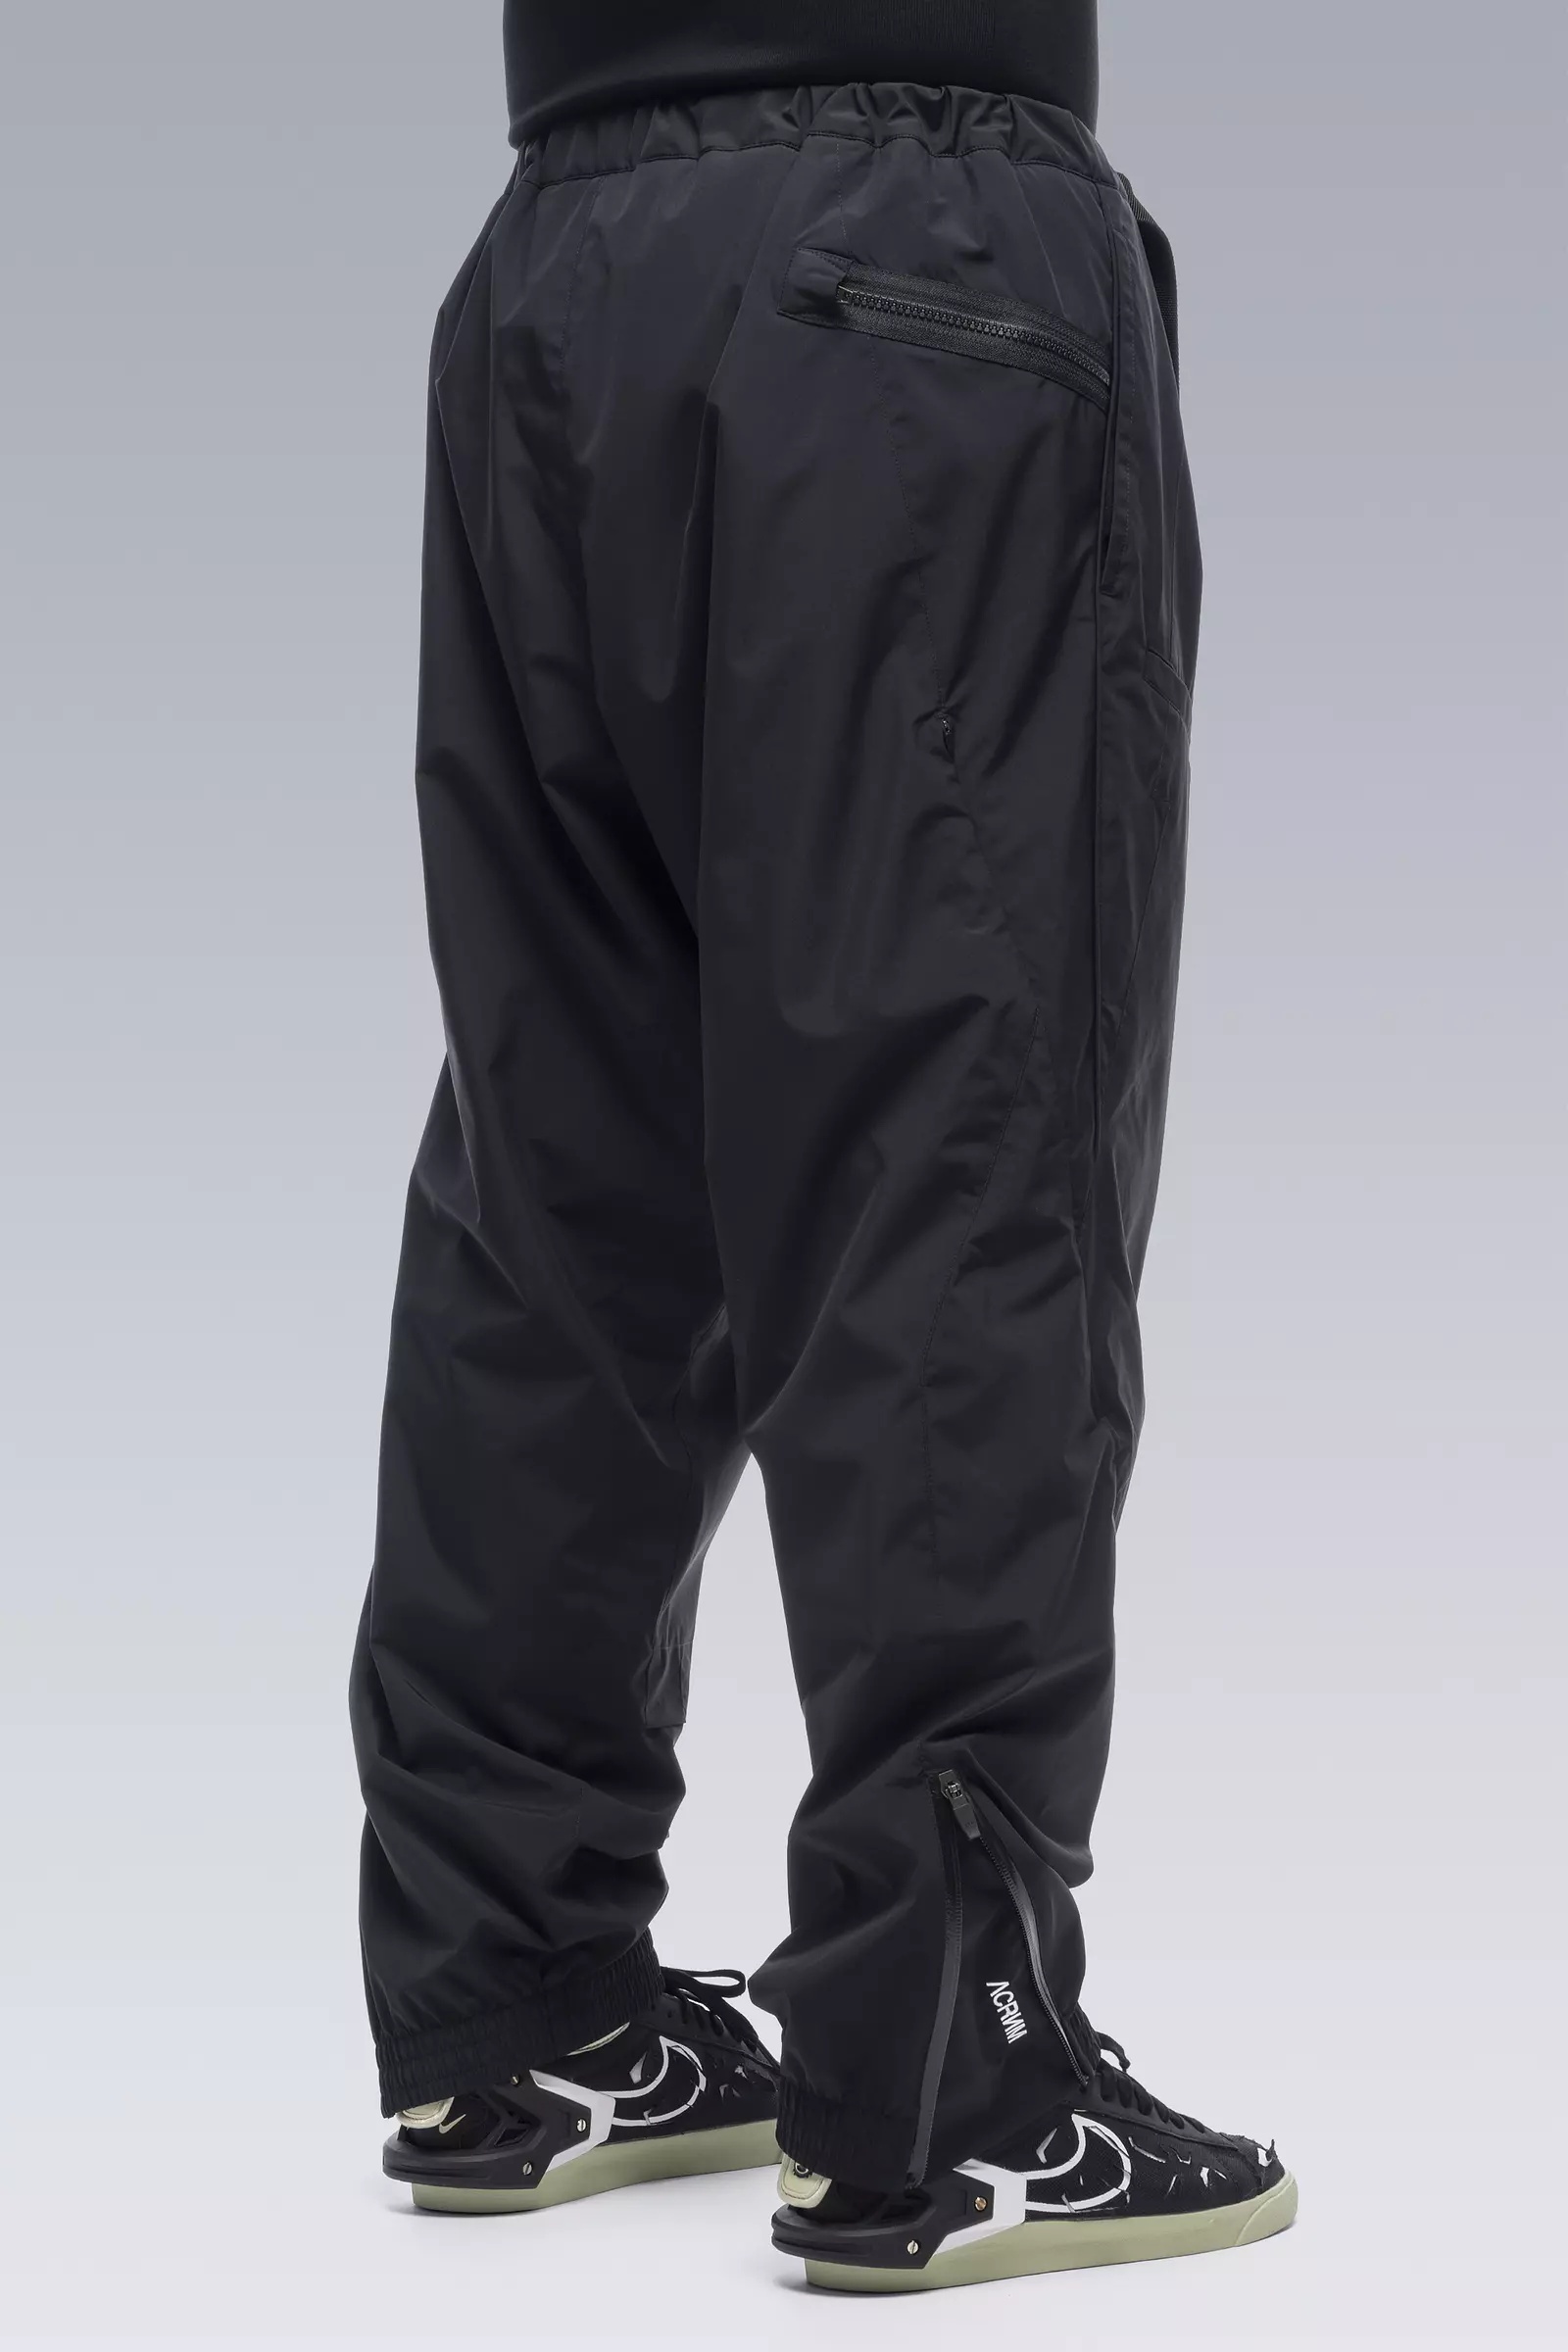 P53-WS 2L Gore-Tex® Windstopper® Insulated Vent Pants Black - 5